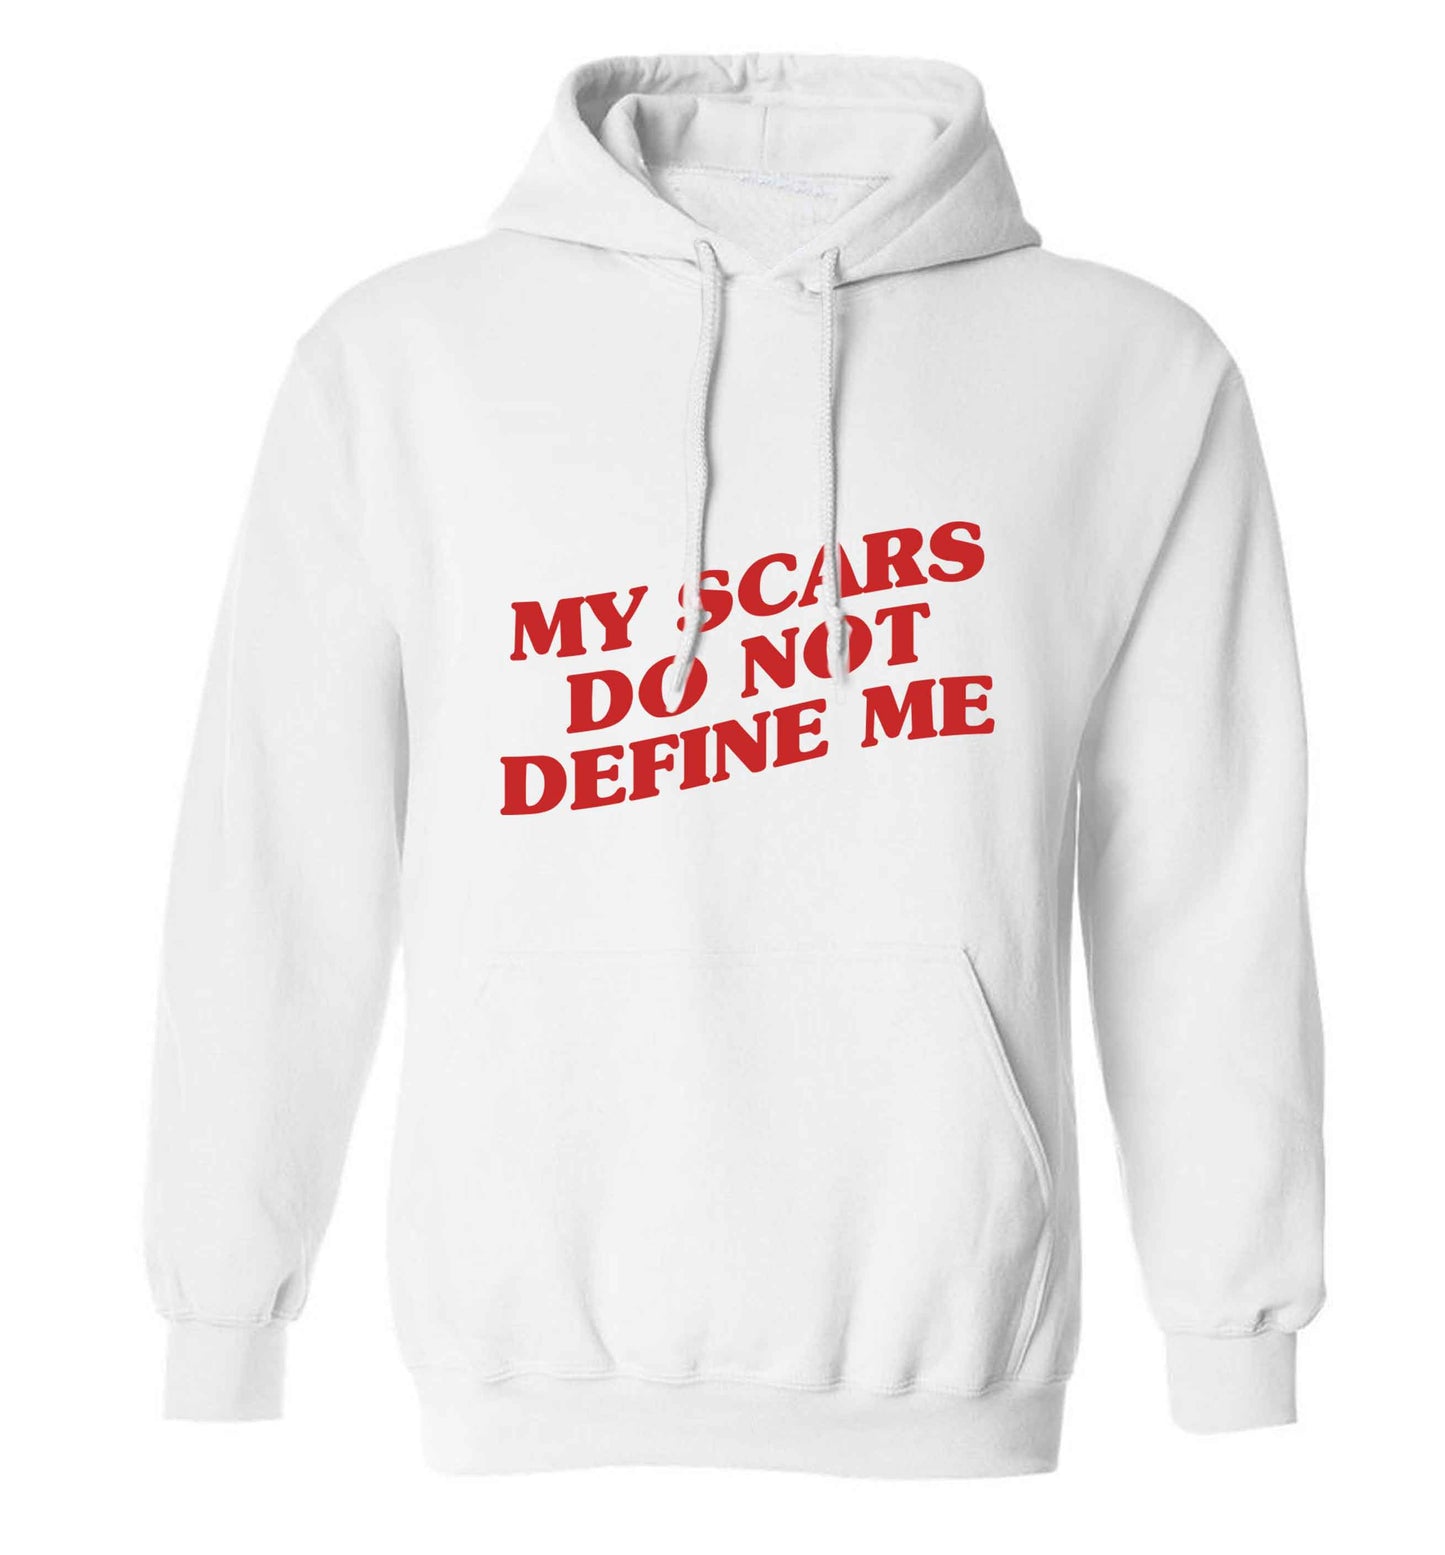 My scars do not define me adults unisex white hoodie 2XL